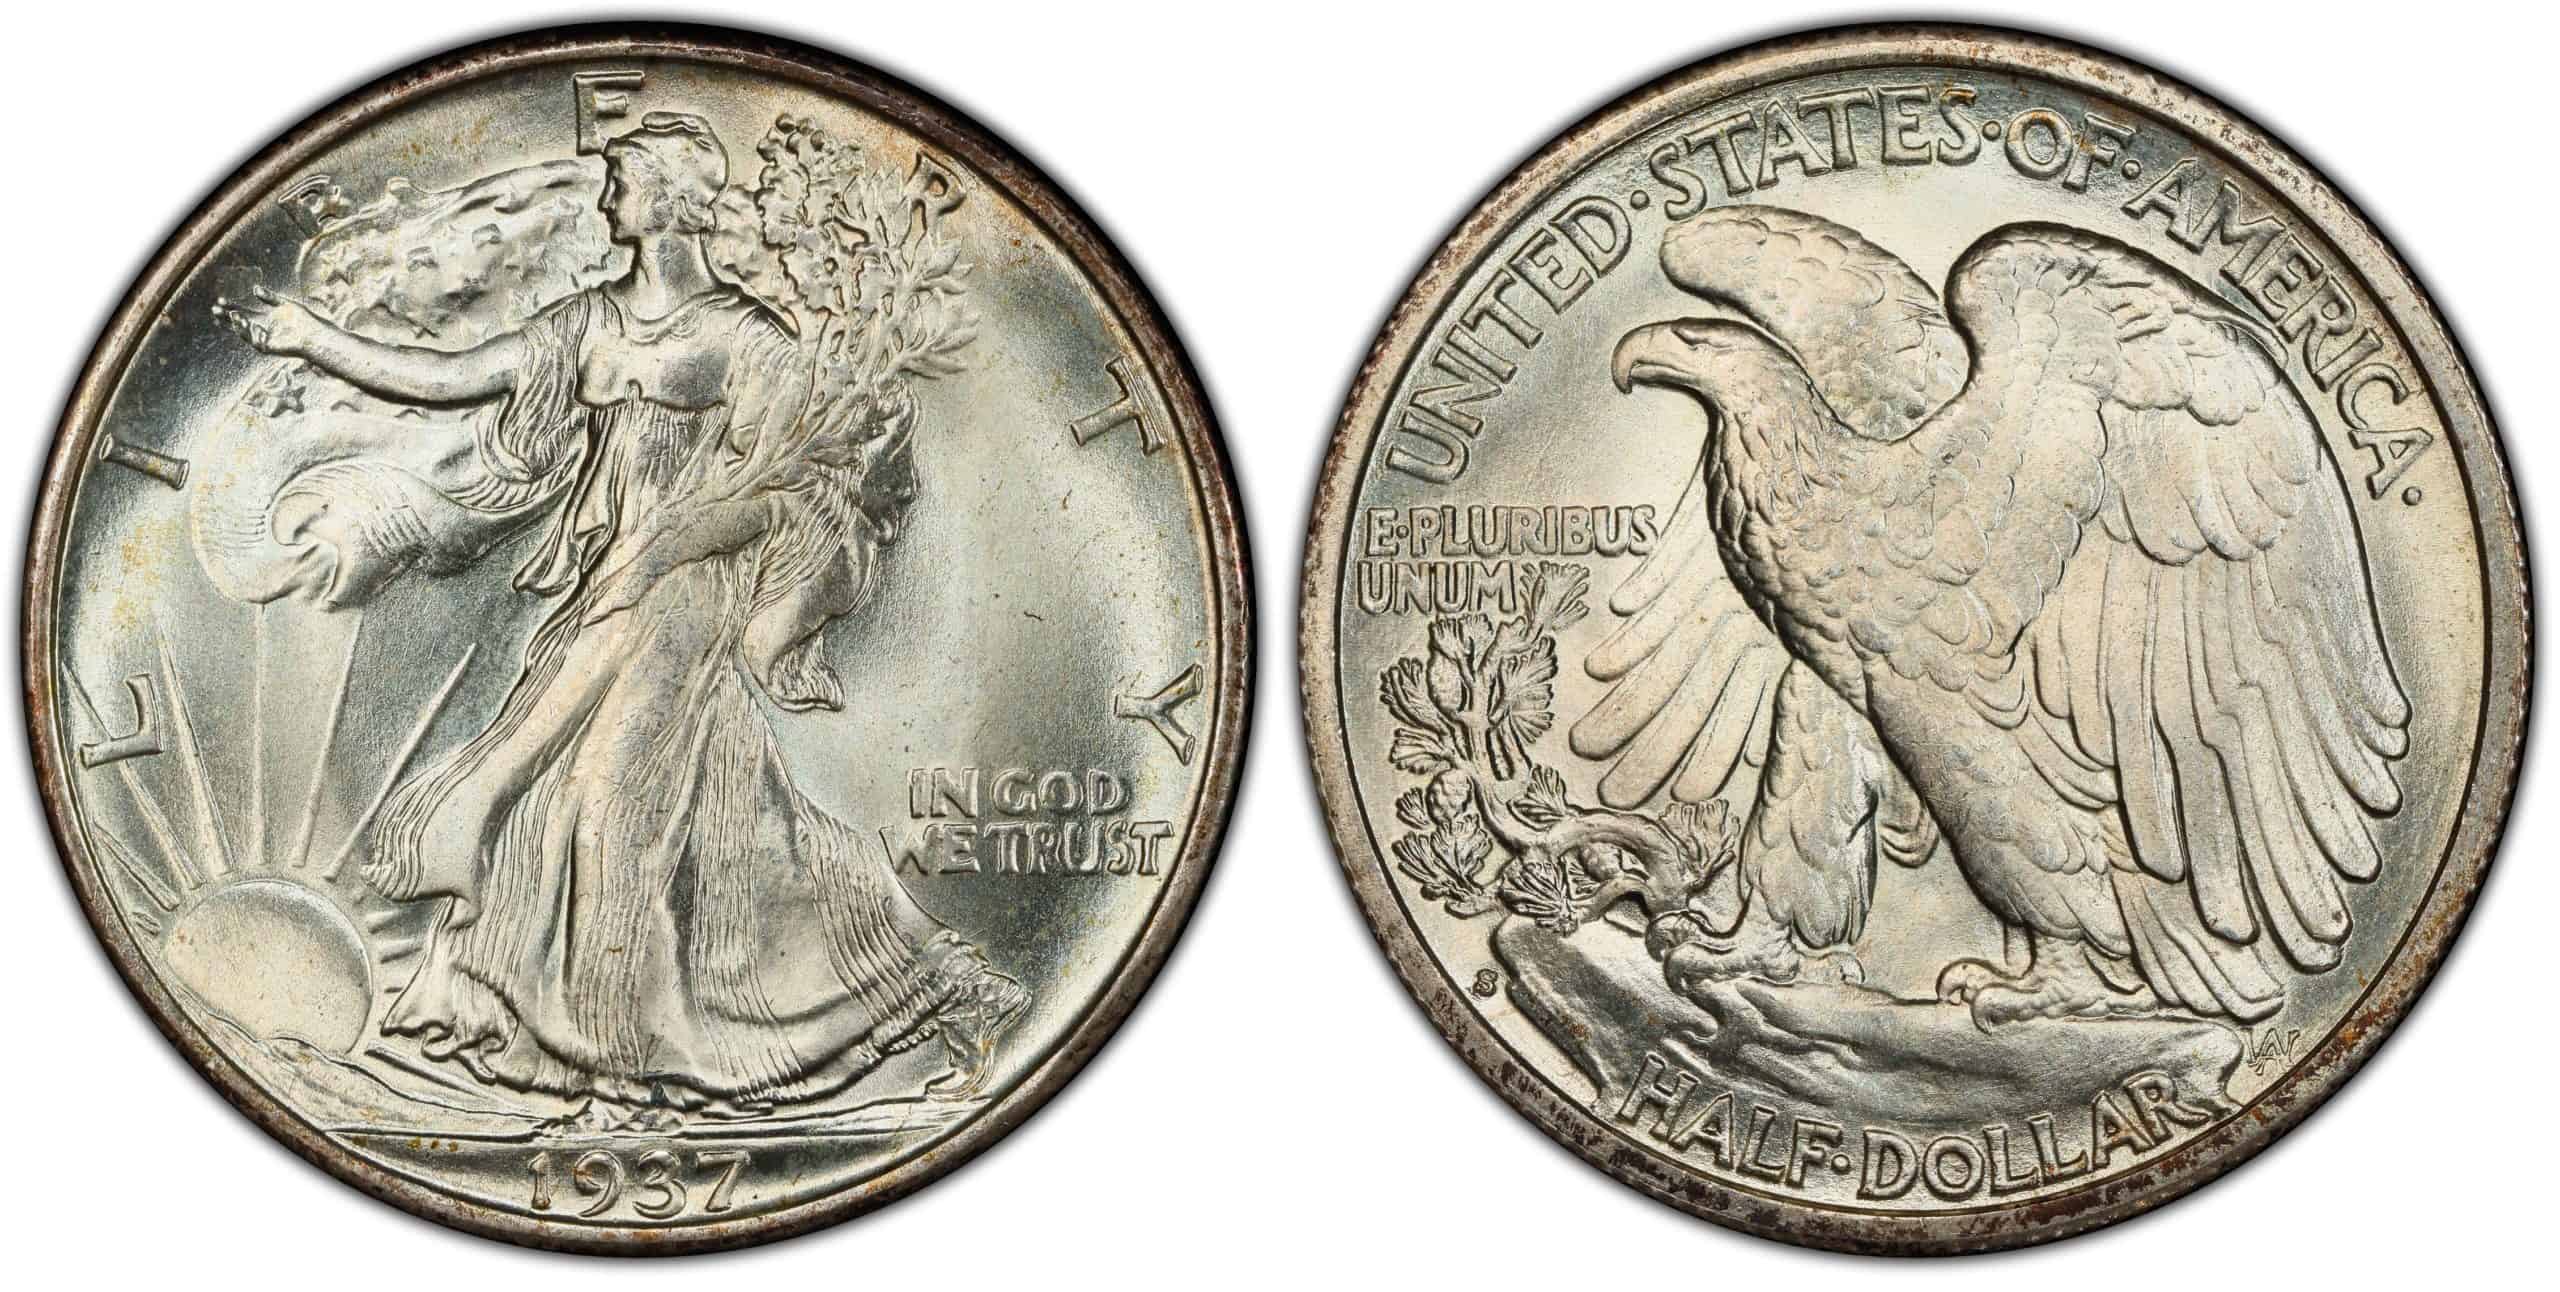 What’s the 1937 Half Dollar